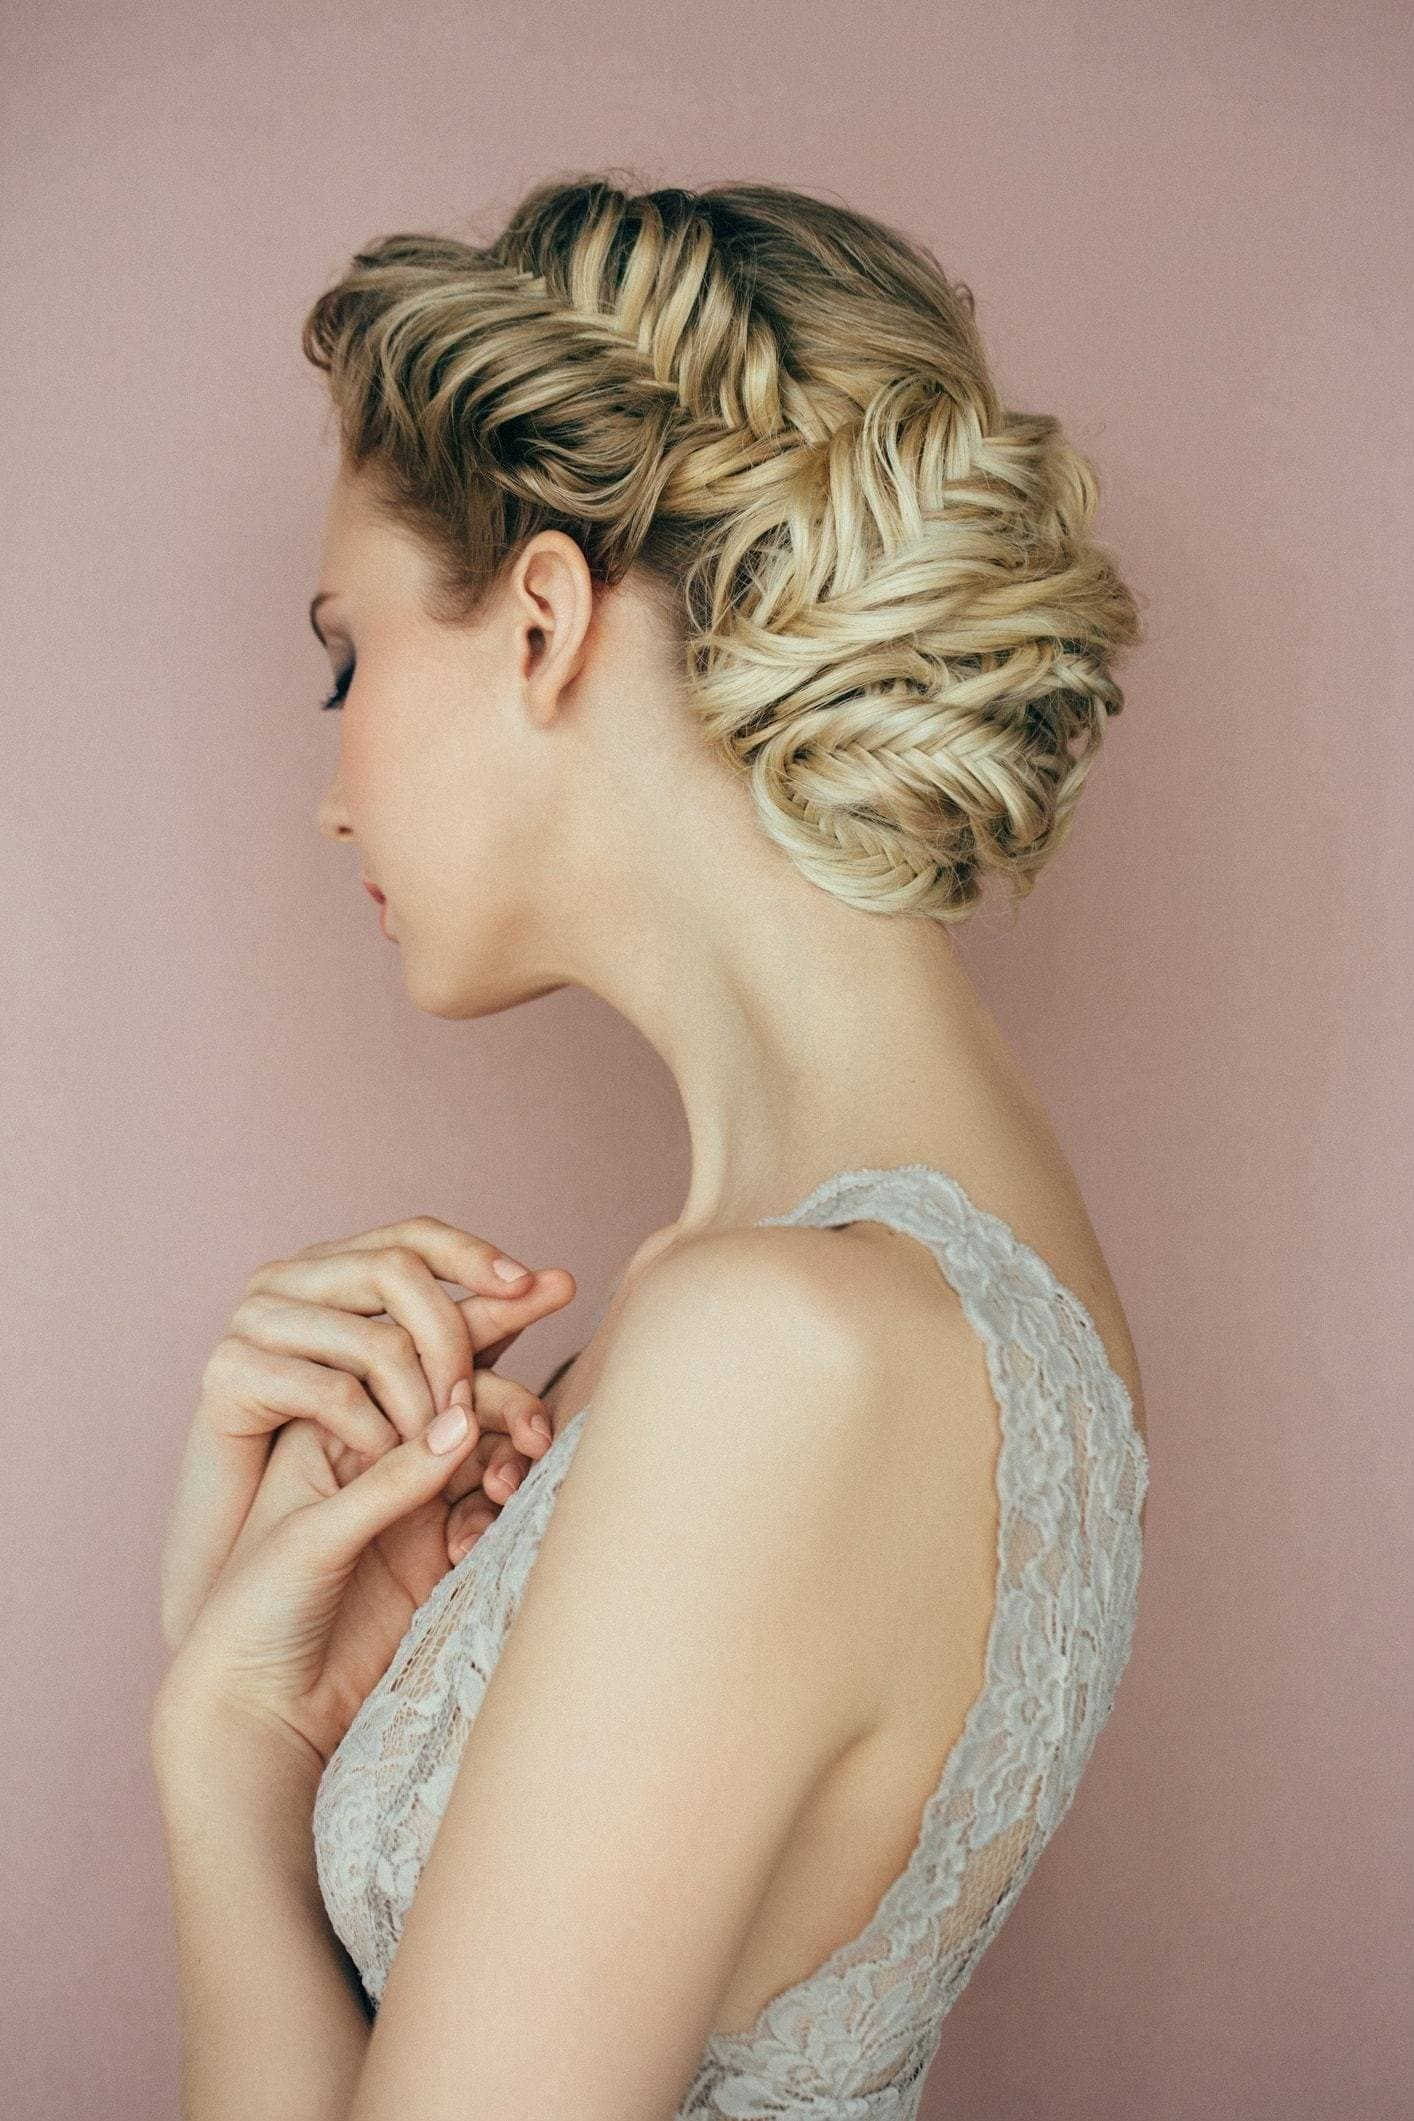 Prom Hairstyles Braided
 14 D I Y Curly Prom Hairstyles to Swoon Over